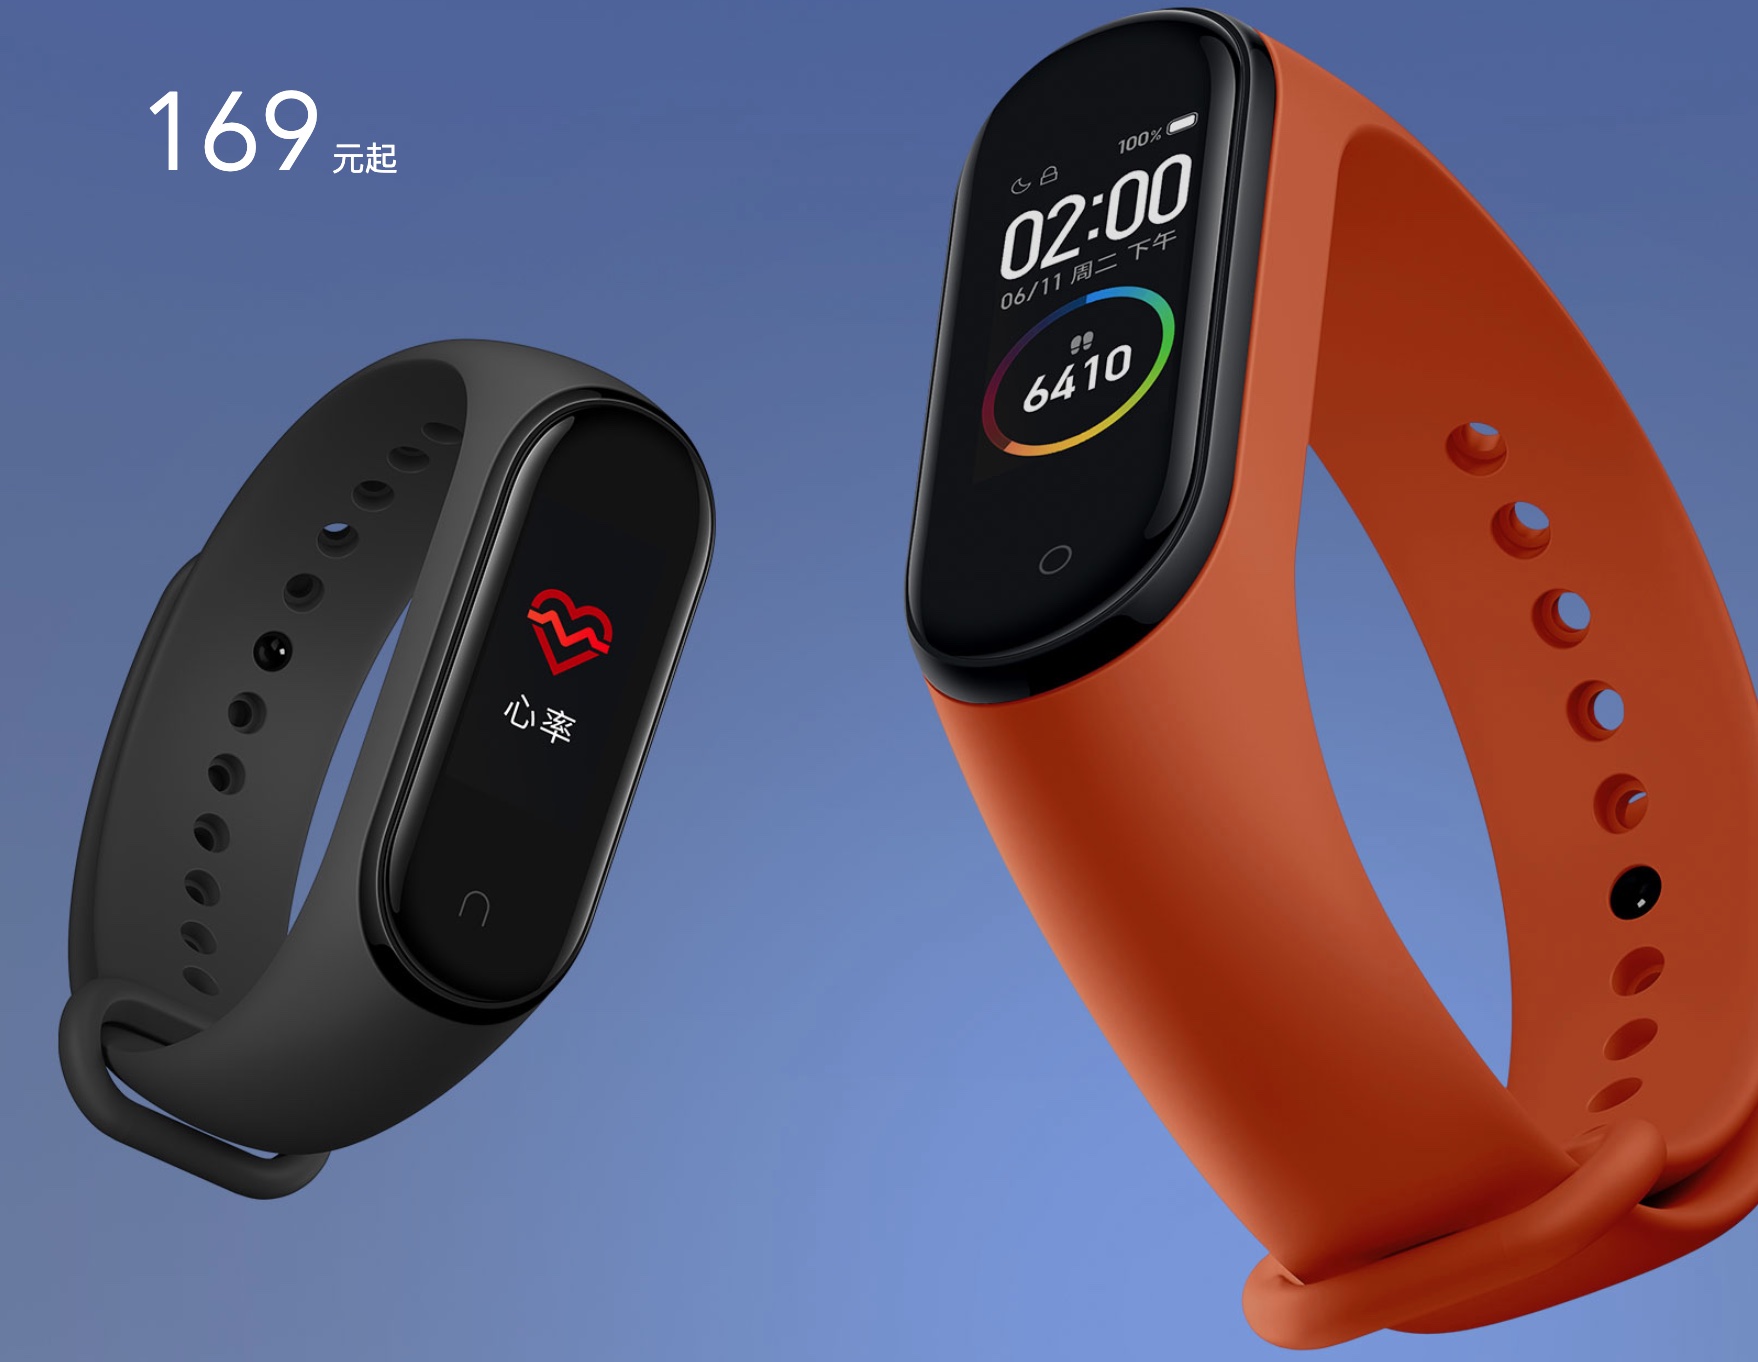 Xiaomi Band 4 world's bestselling smart band, report shows